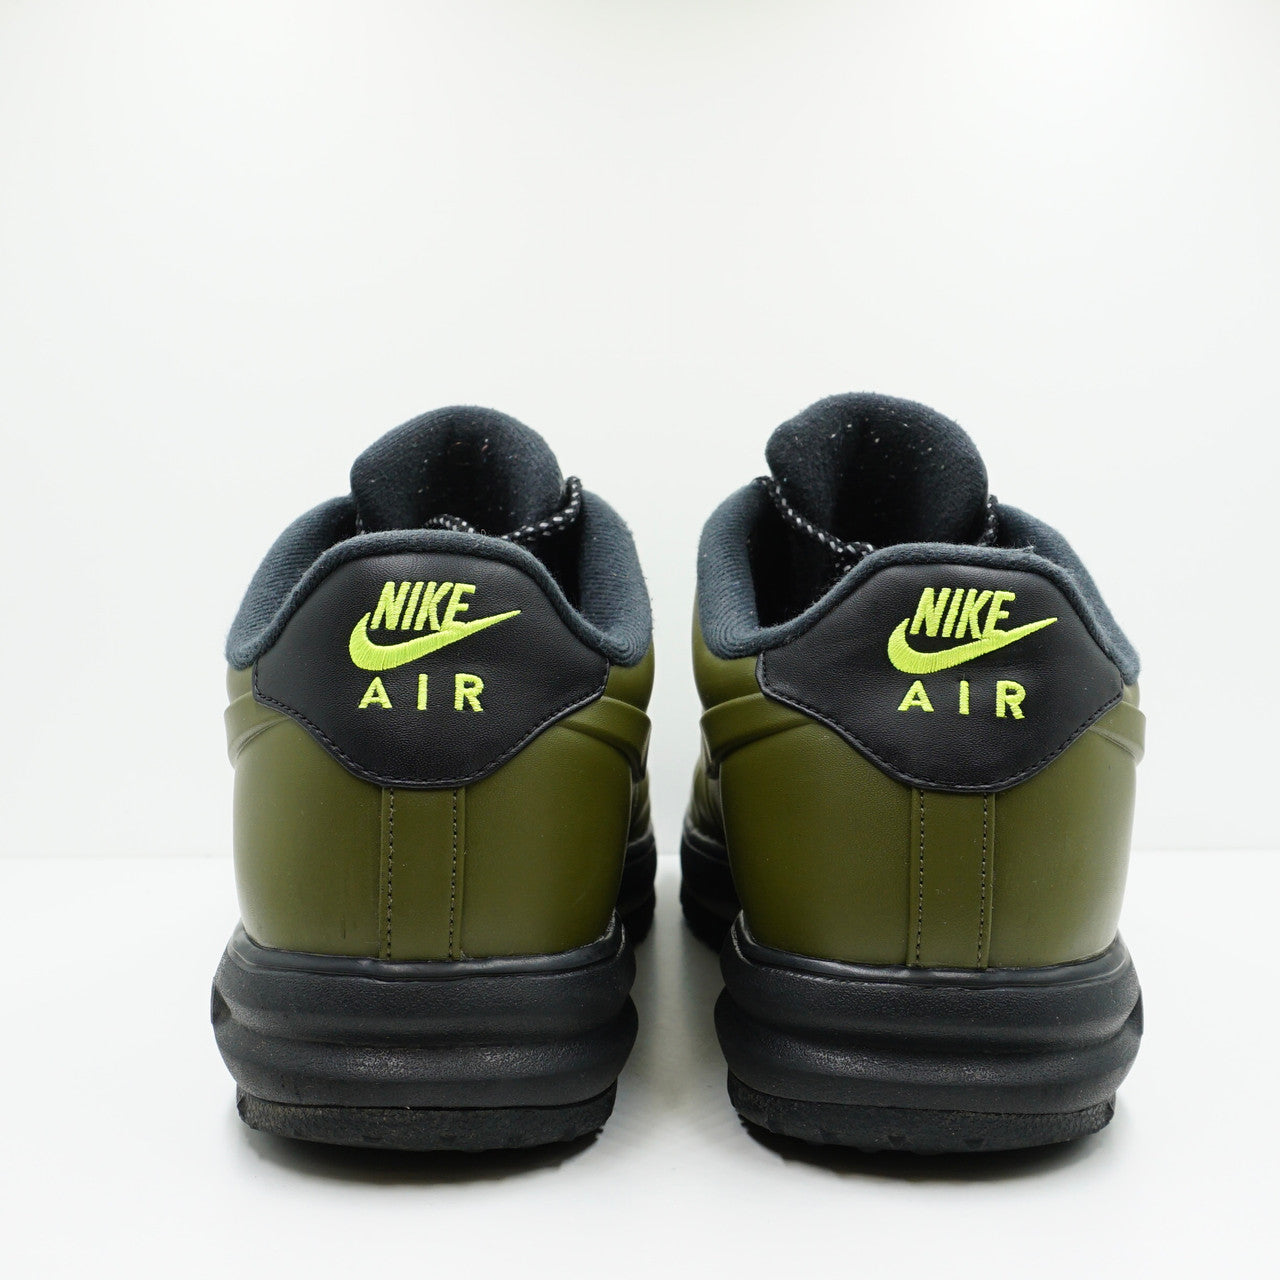 Nike Lunar Force 1 Duckboot Low Olive Canvas